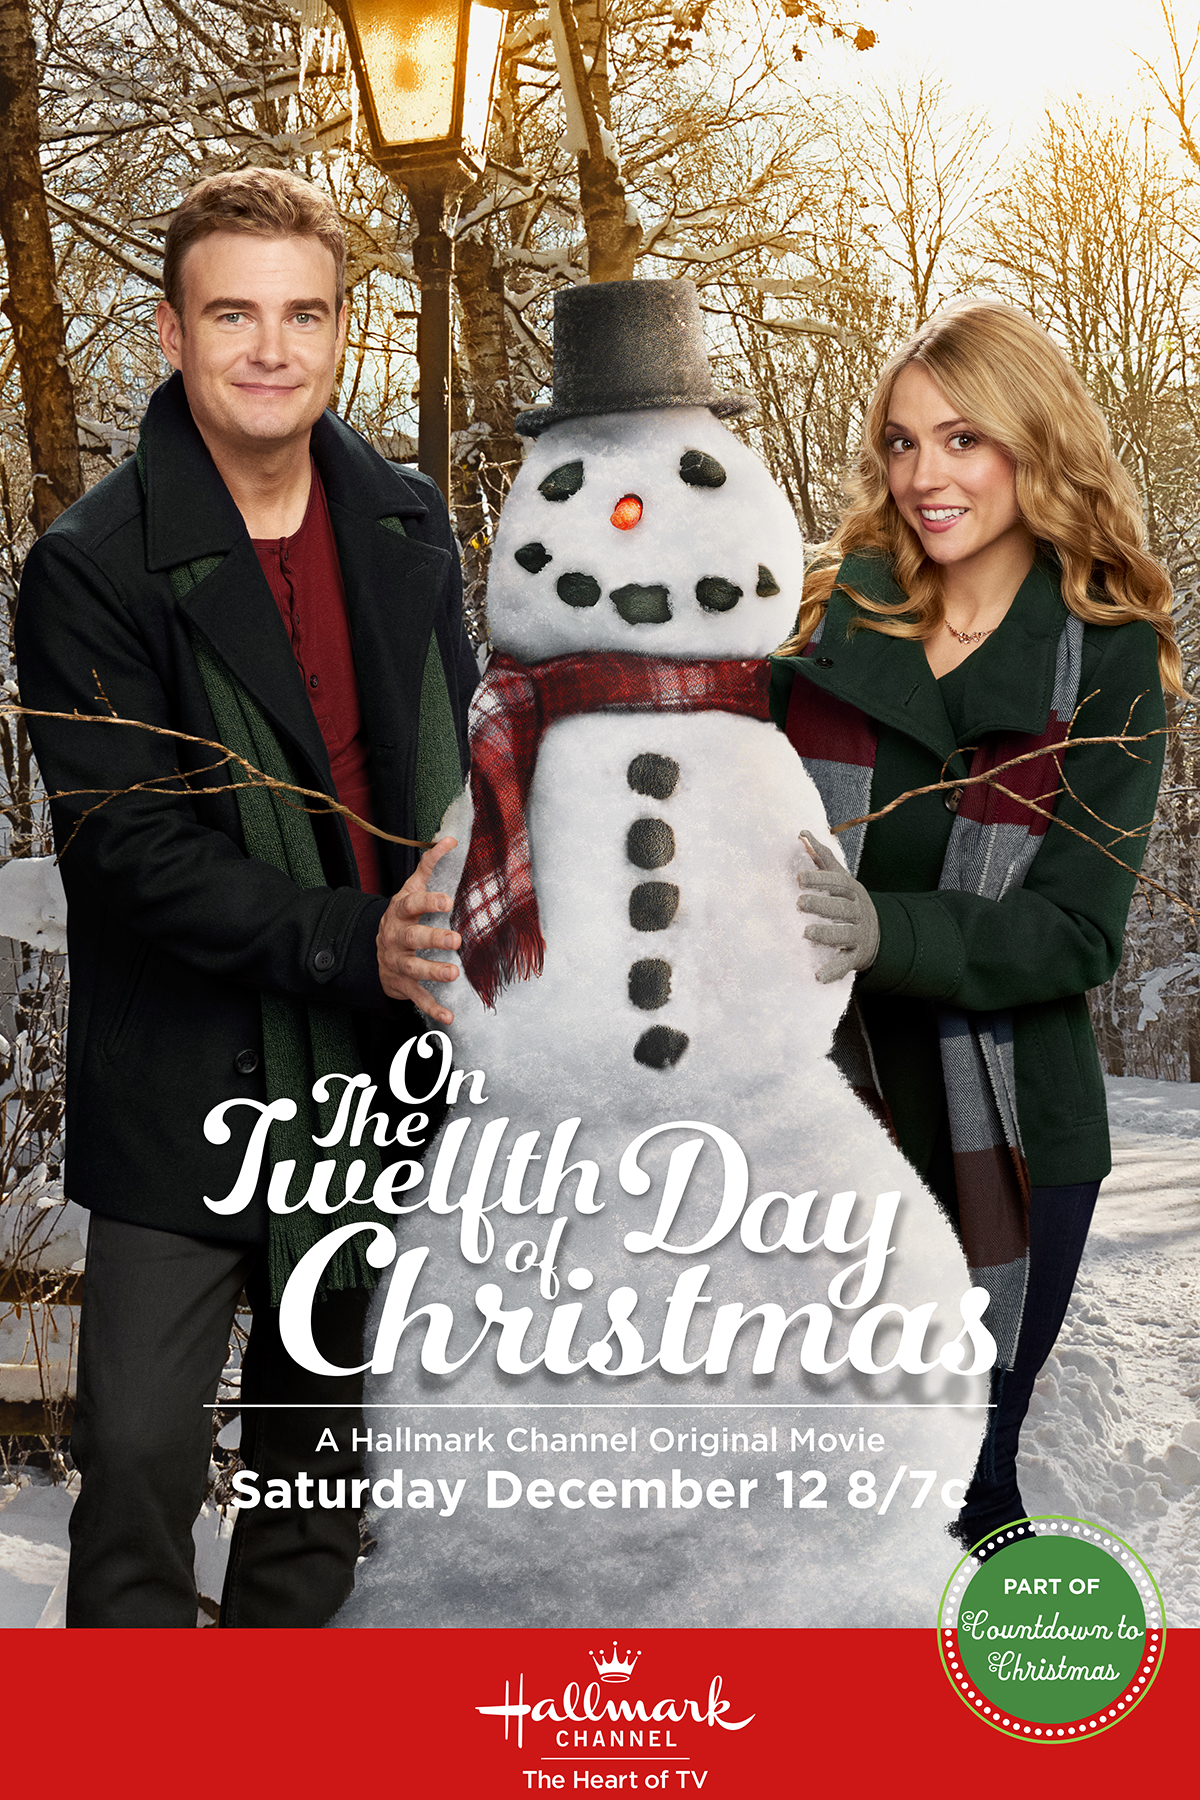 My Devotional Thoughts | “On the Twelfth Day of Christmas” Hallmark Movie Review